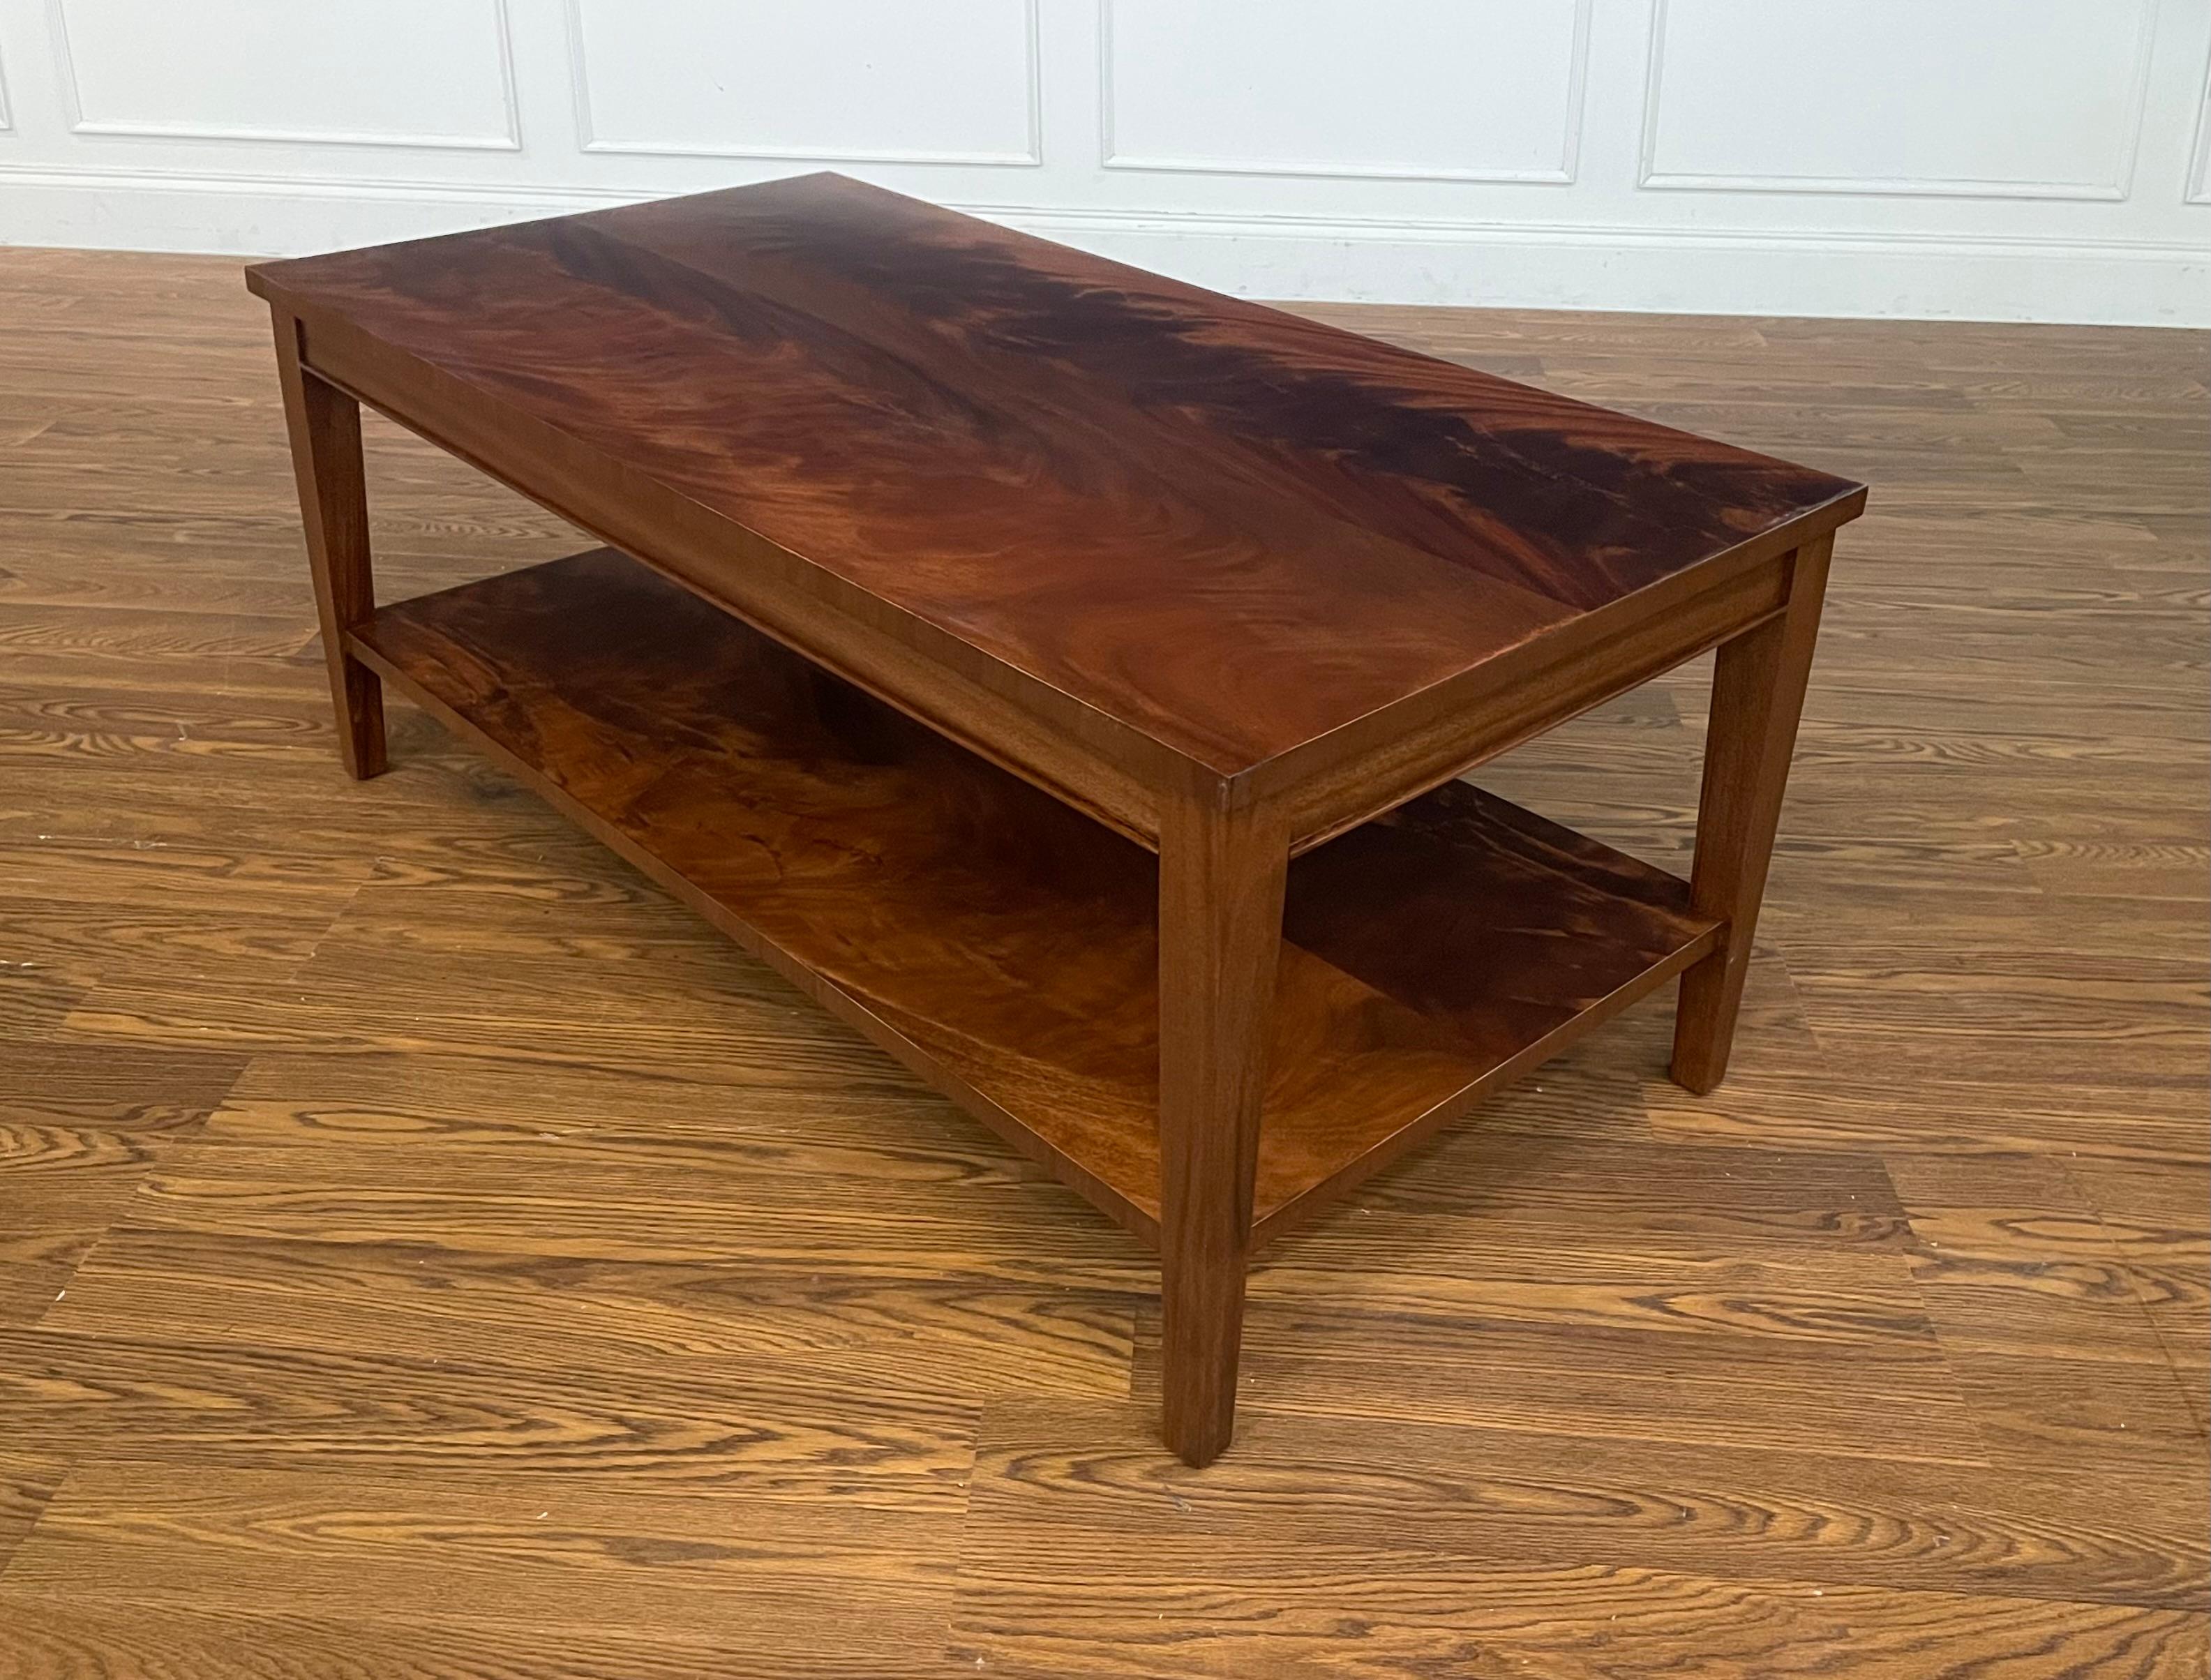  Custom Mahogany Rectangular Cocktail Table  In New Condition For Sale In Suwanee, GA